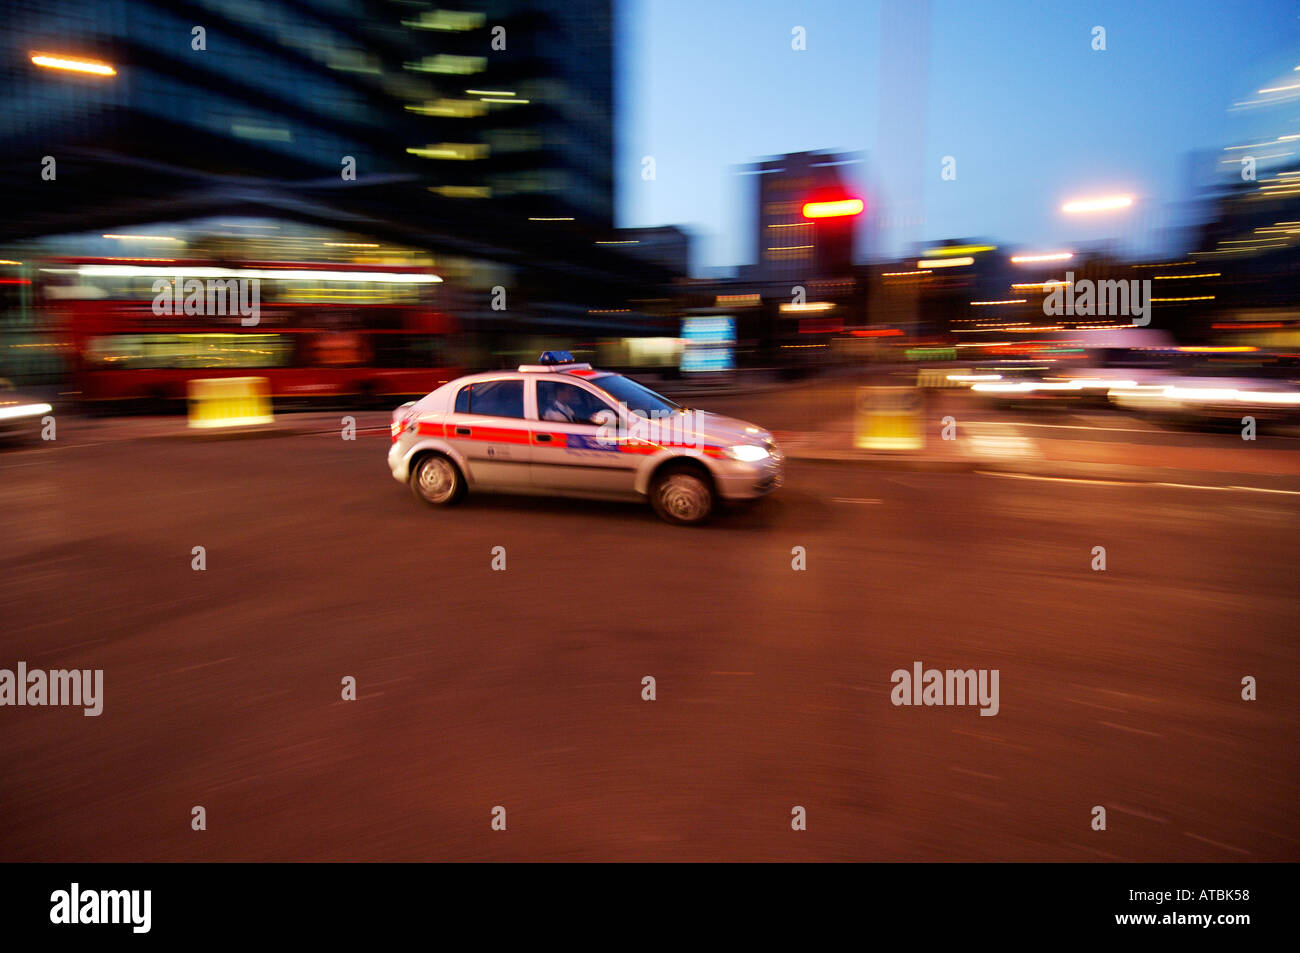 police car at night with motion blur to show movement Stock Photo